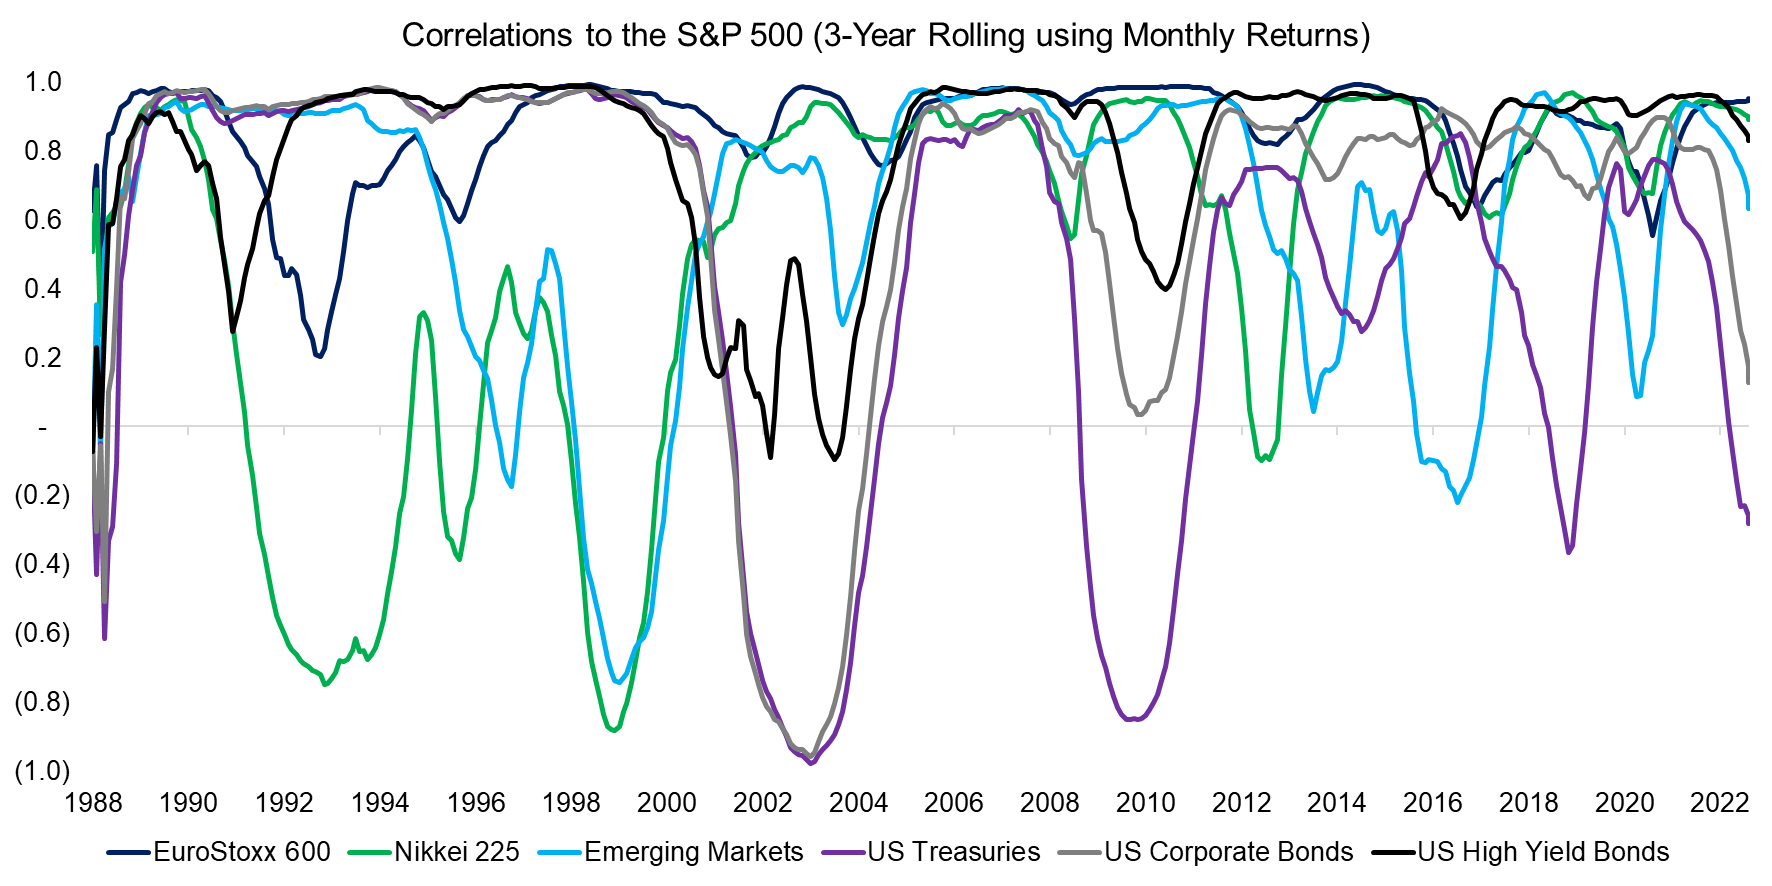 Correlations to the S&P 500 (3-Year Rolling using Monthly Returns)